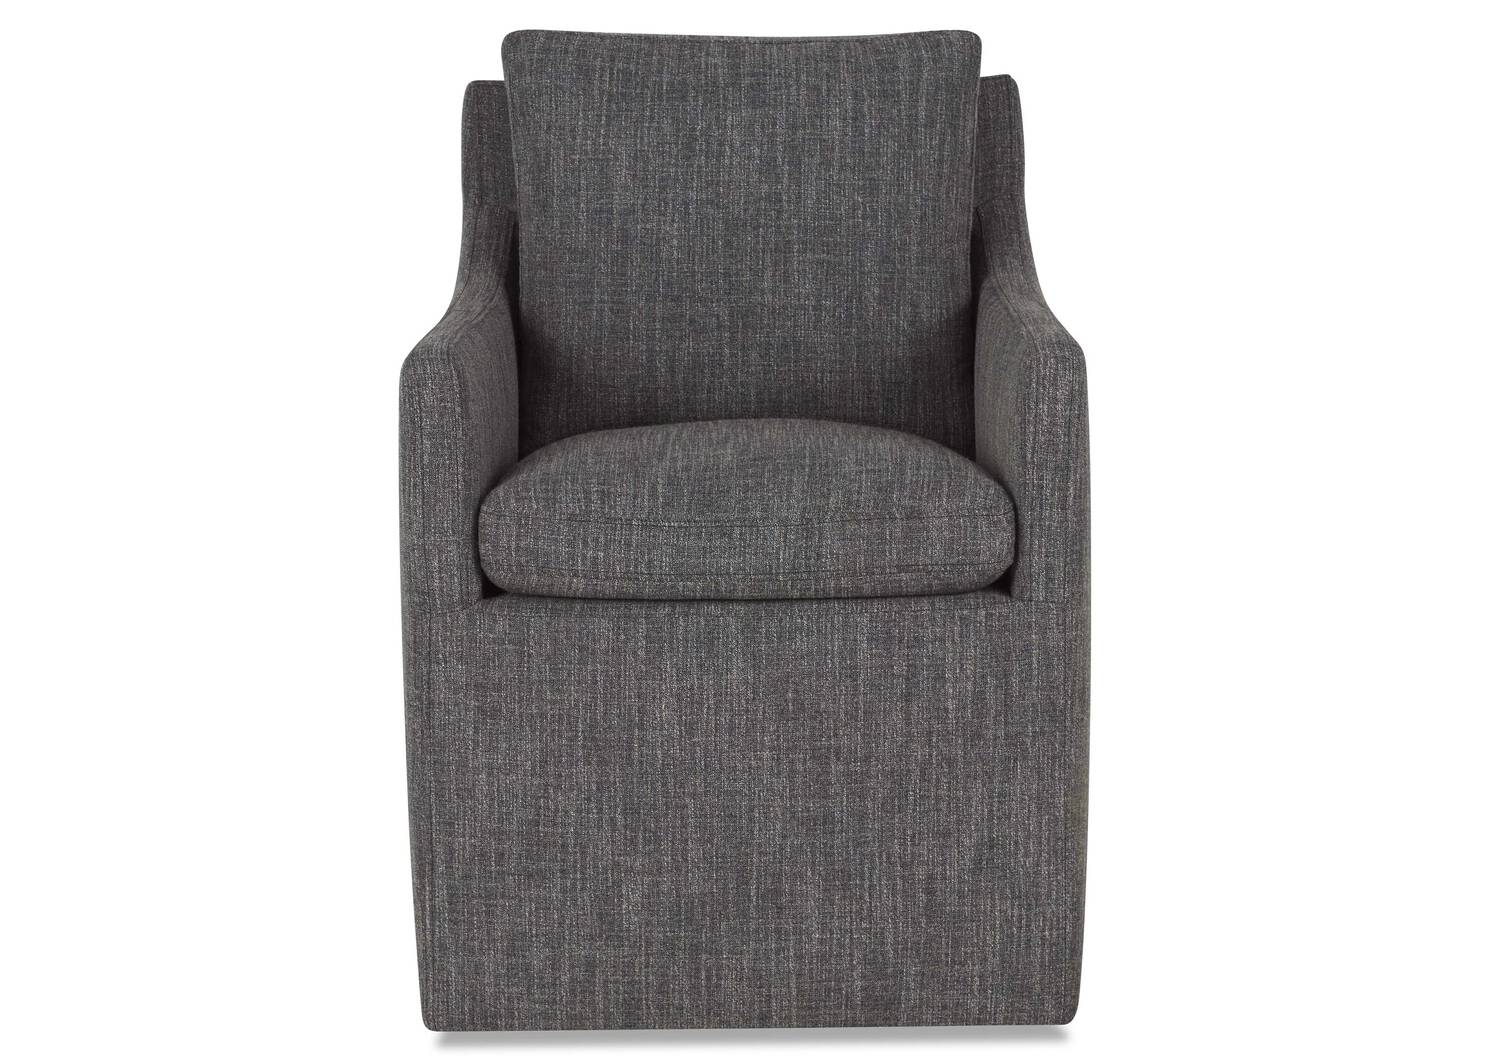 Armand Host Chair -Lund Charcoal